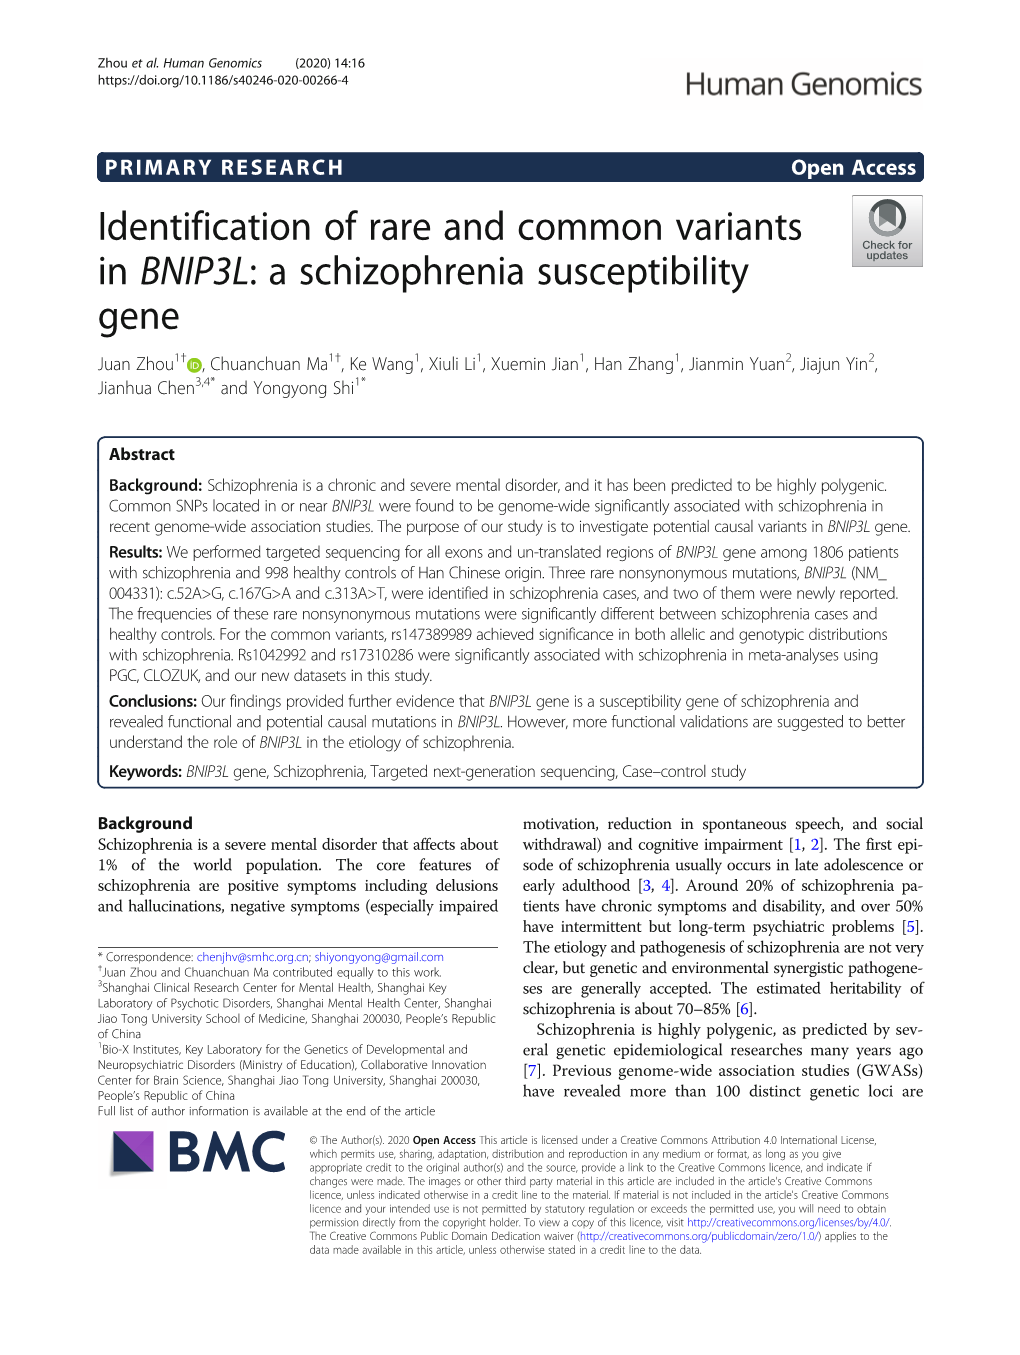 Identification of Rare and Common Variants in BNIP3L: a Schizophrenia